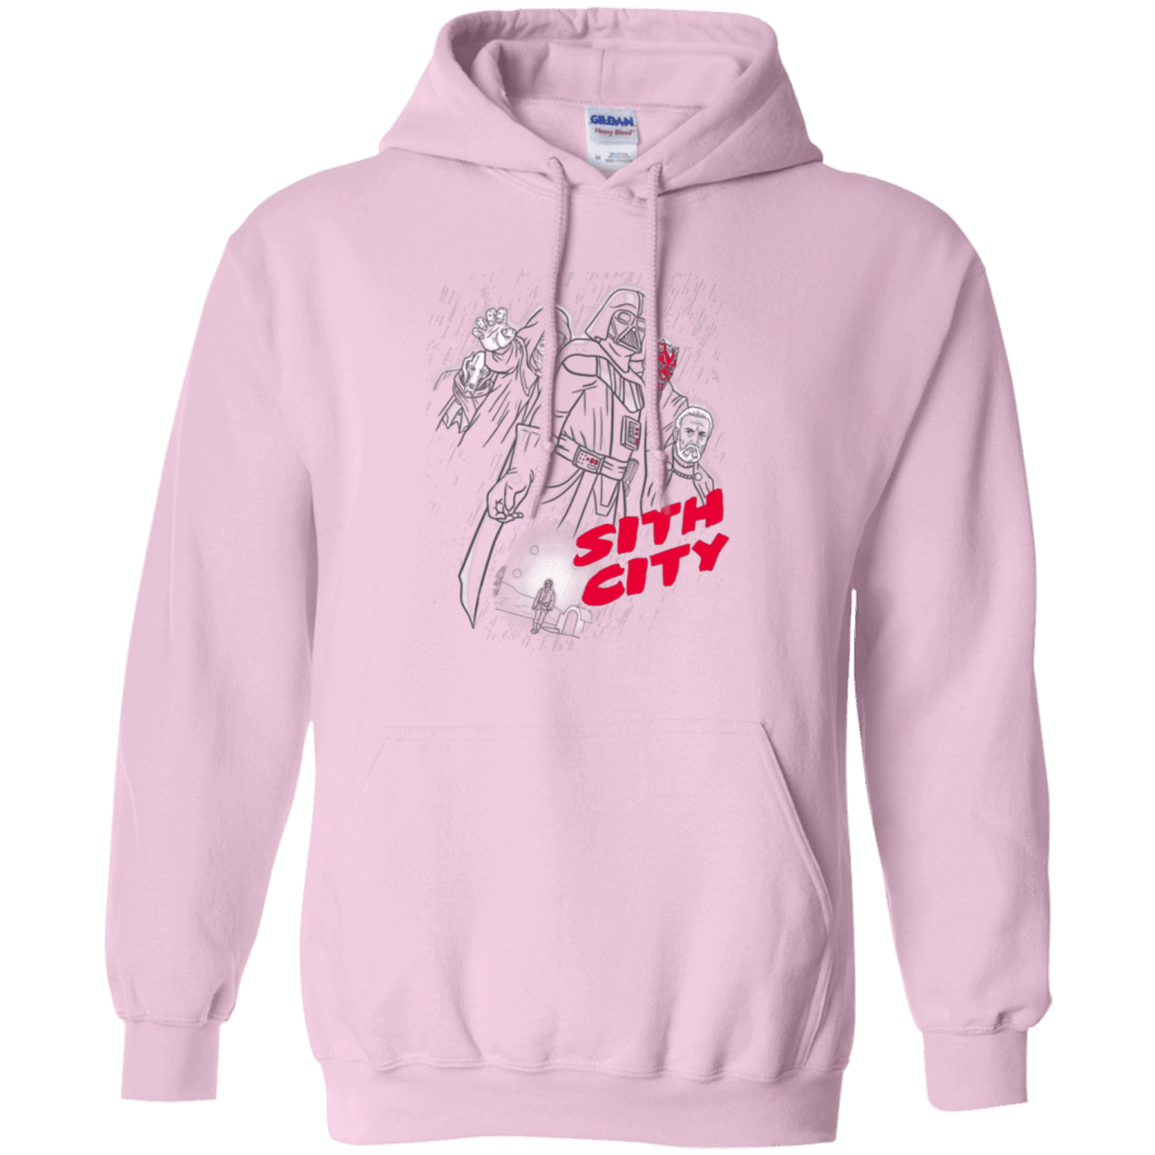 Sweatshirts Light Pink / Small Sith city Pullover Hoodie